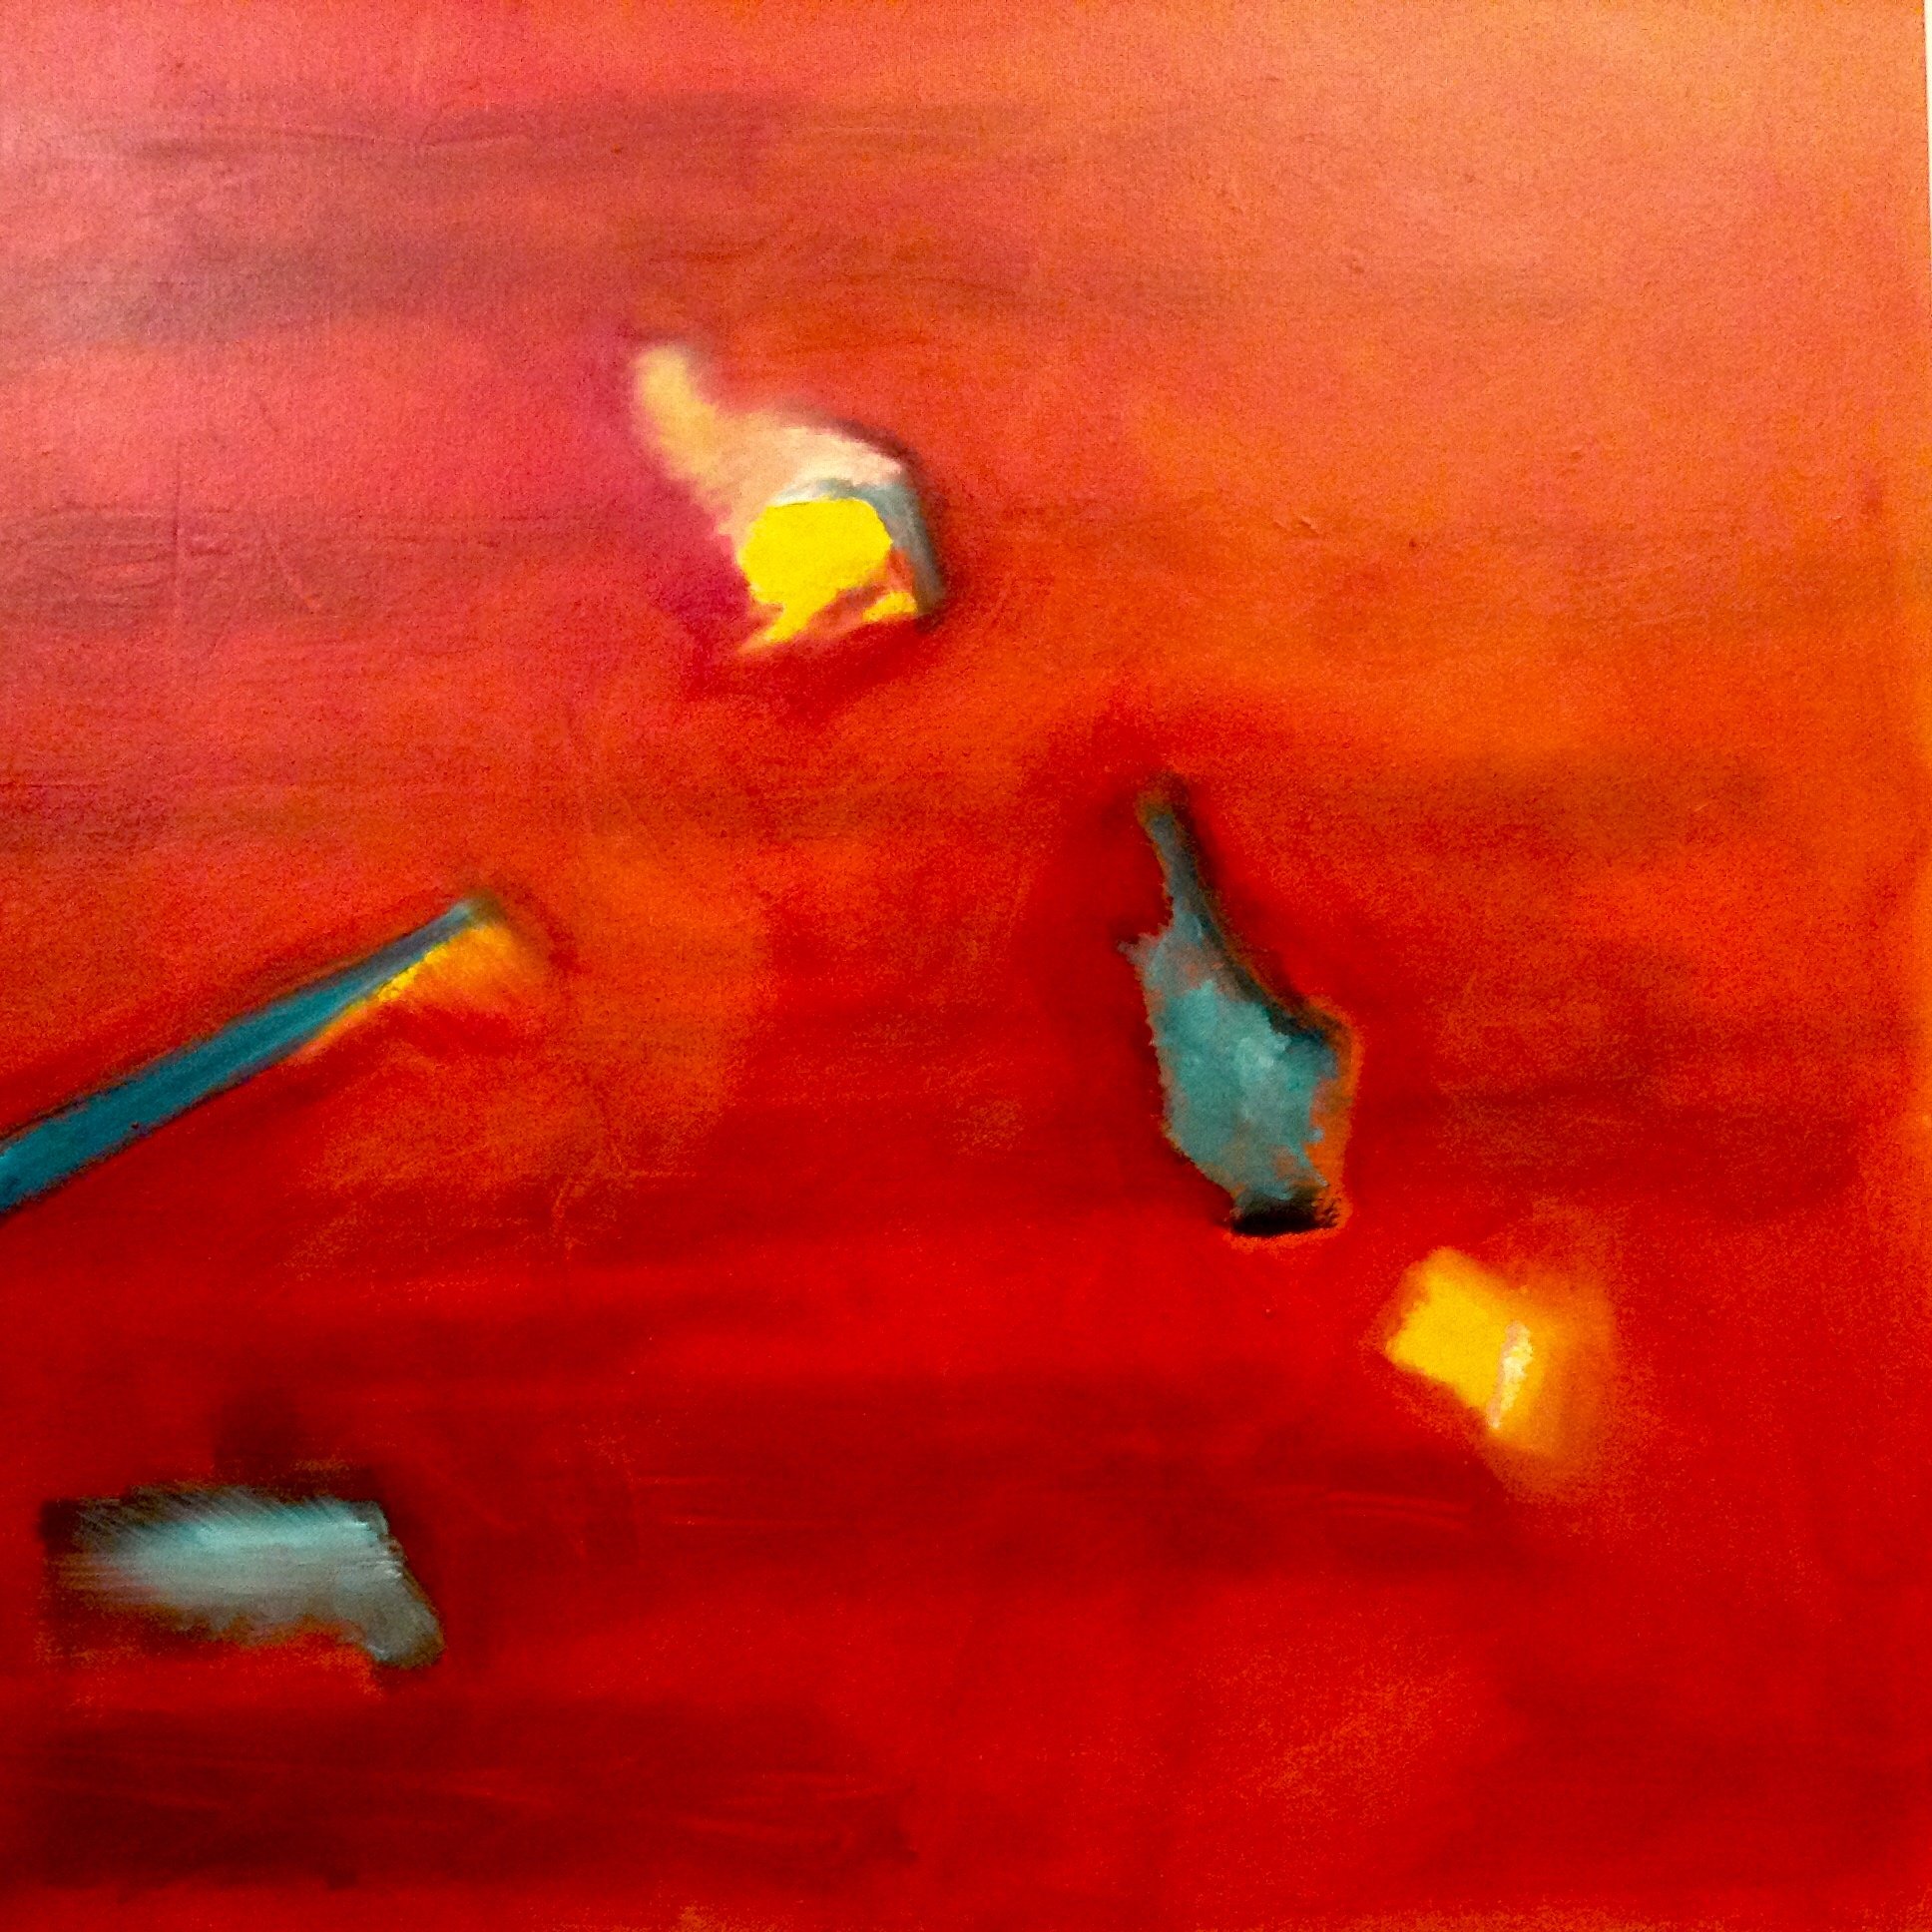    Sante Fe Red  - oil on canvas, 2-foot square  